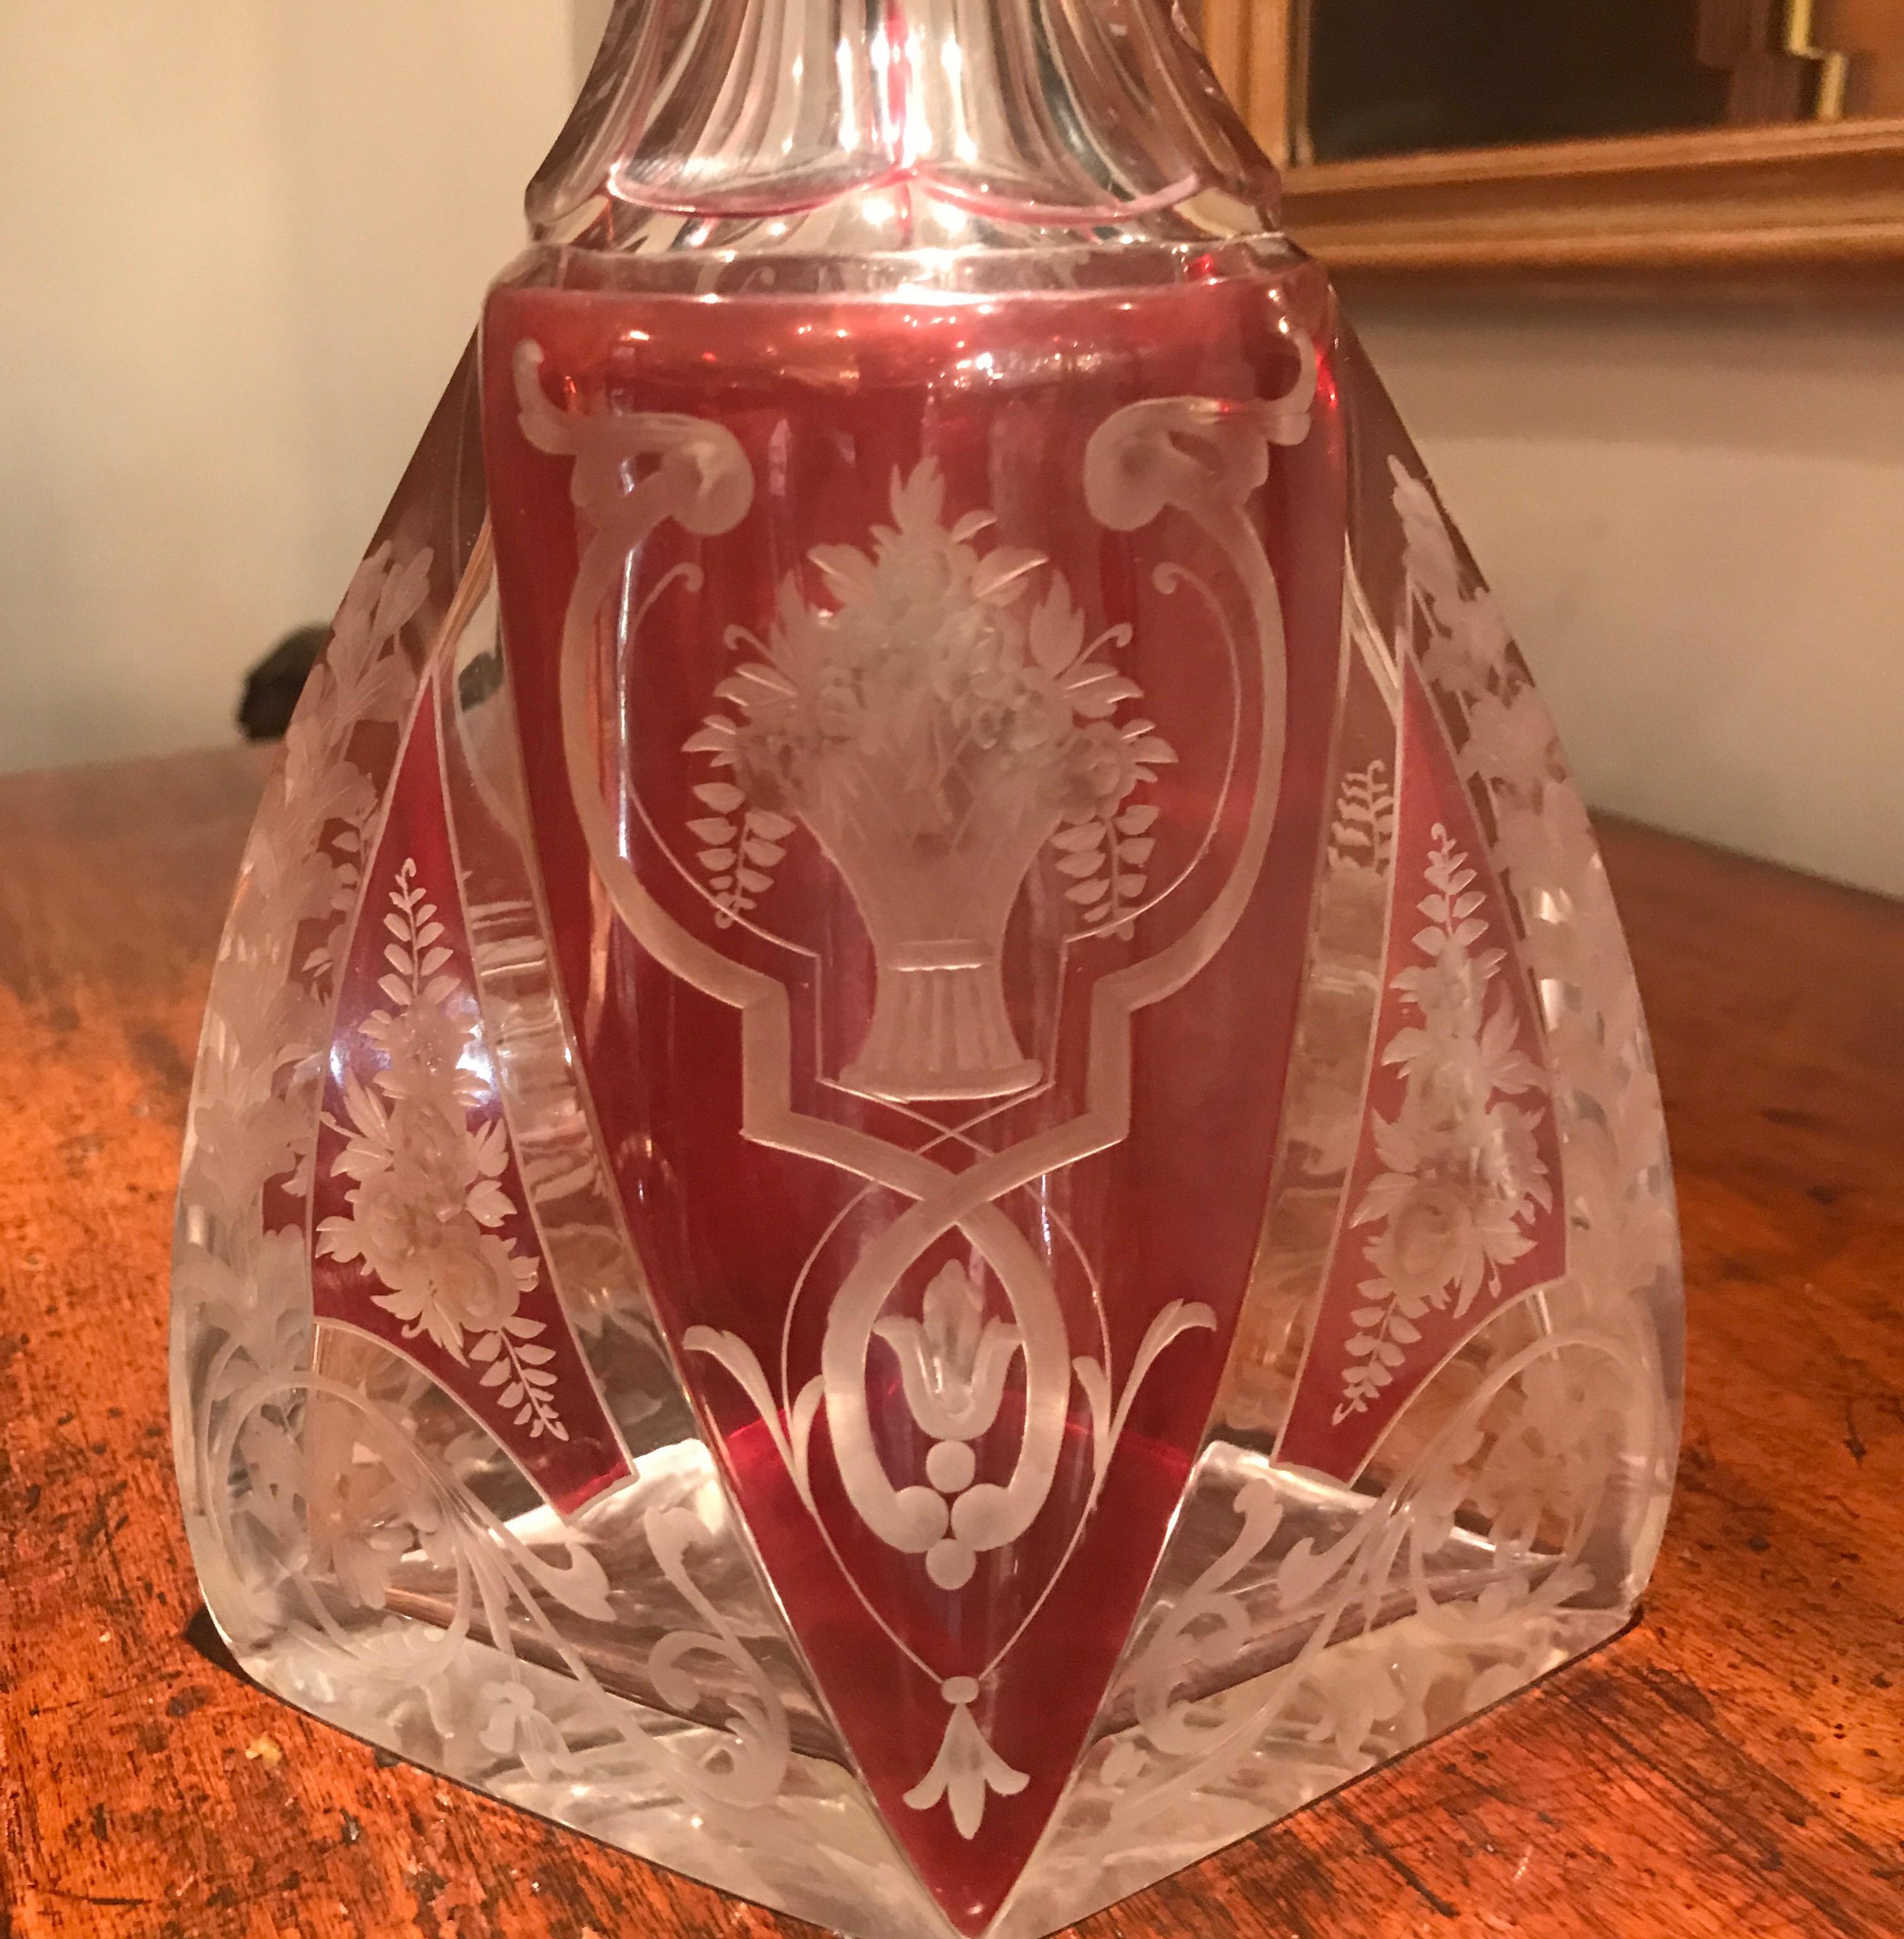 Graceful and elegant intaglio cut-glass tall decanter with original stopper. Panel cut neck with magnificent engraving of floral panels all around. The Violet highlights with a clear cut highly detailed design. Exceptional quality.